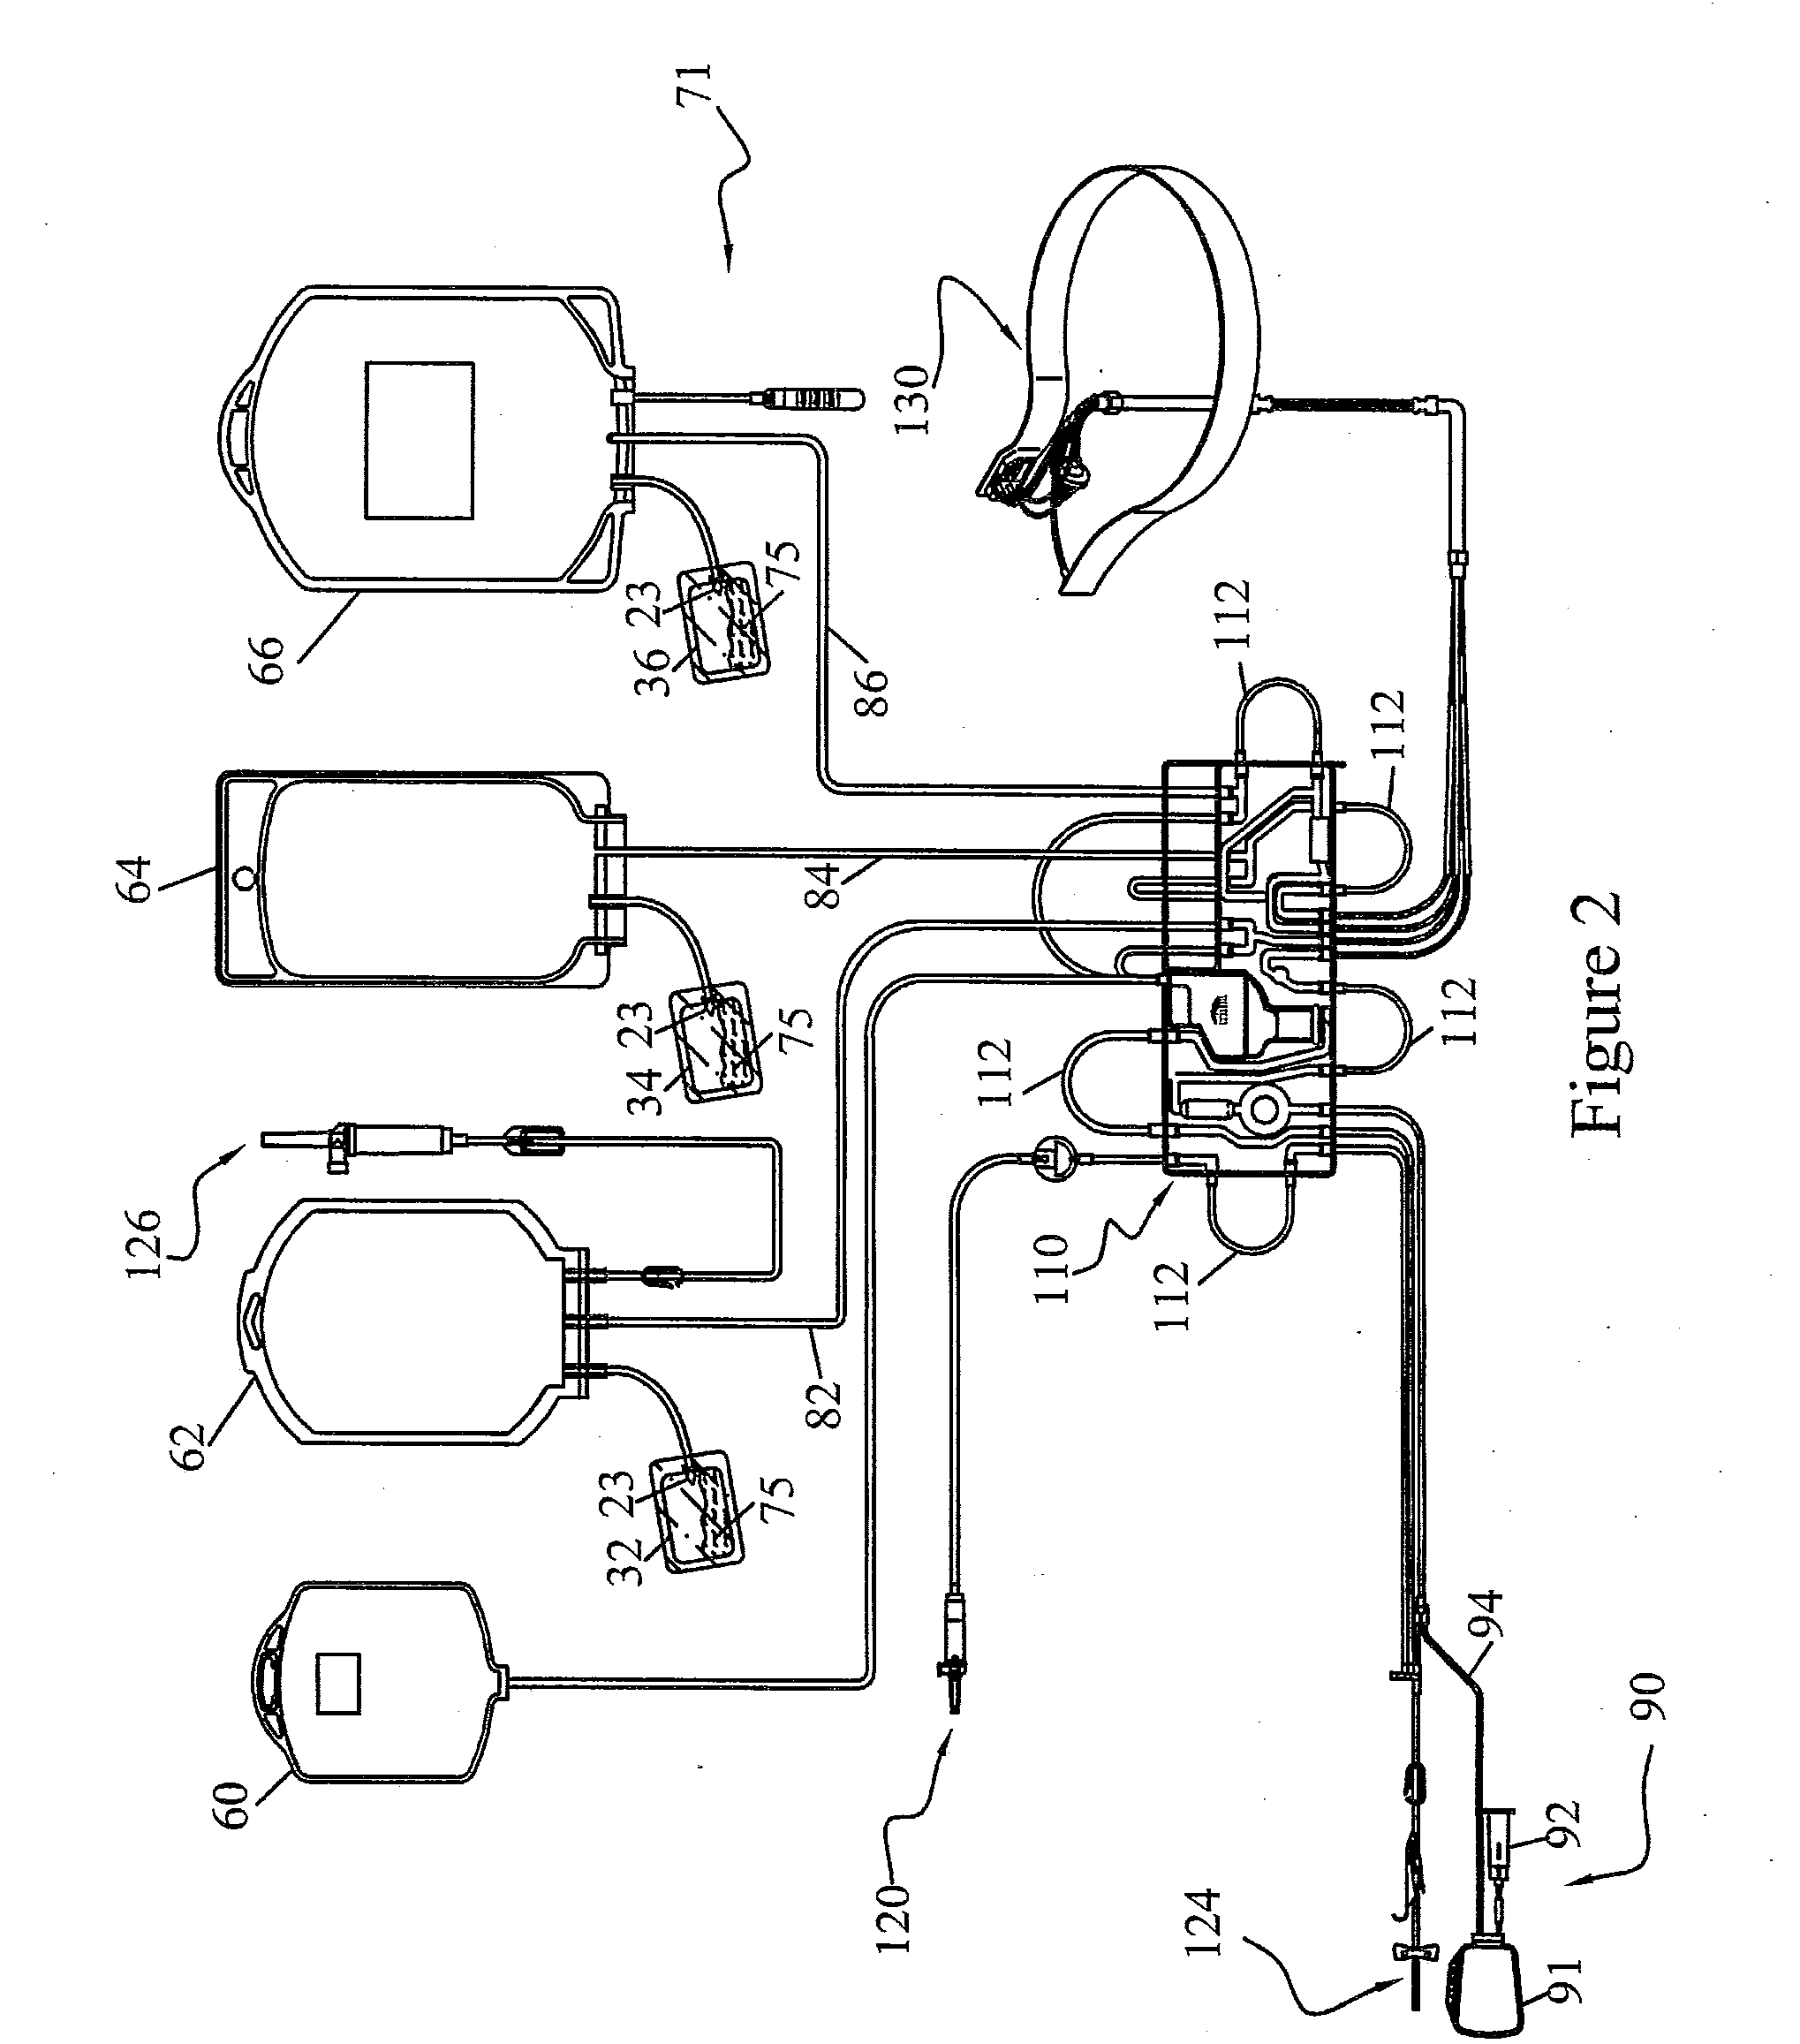 Methods and Systems for Preparing Blood Products